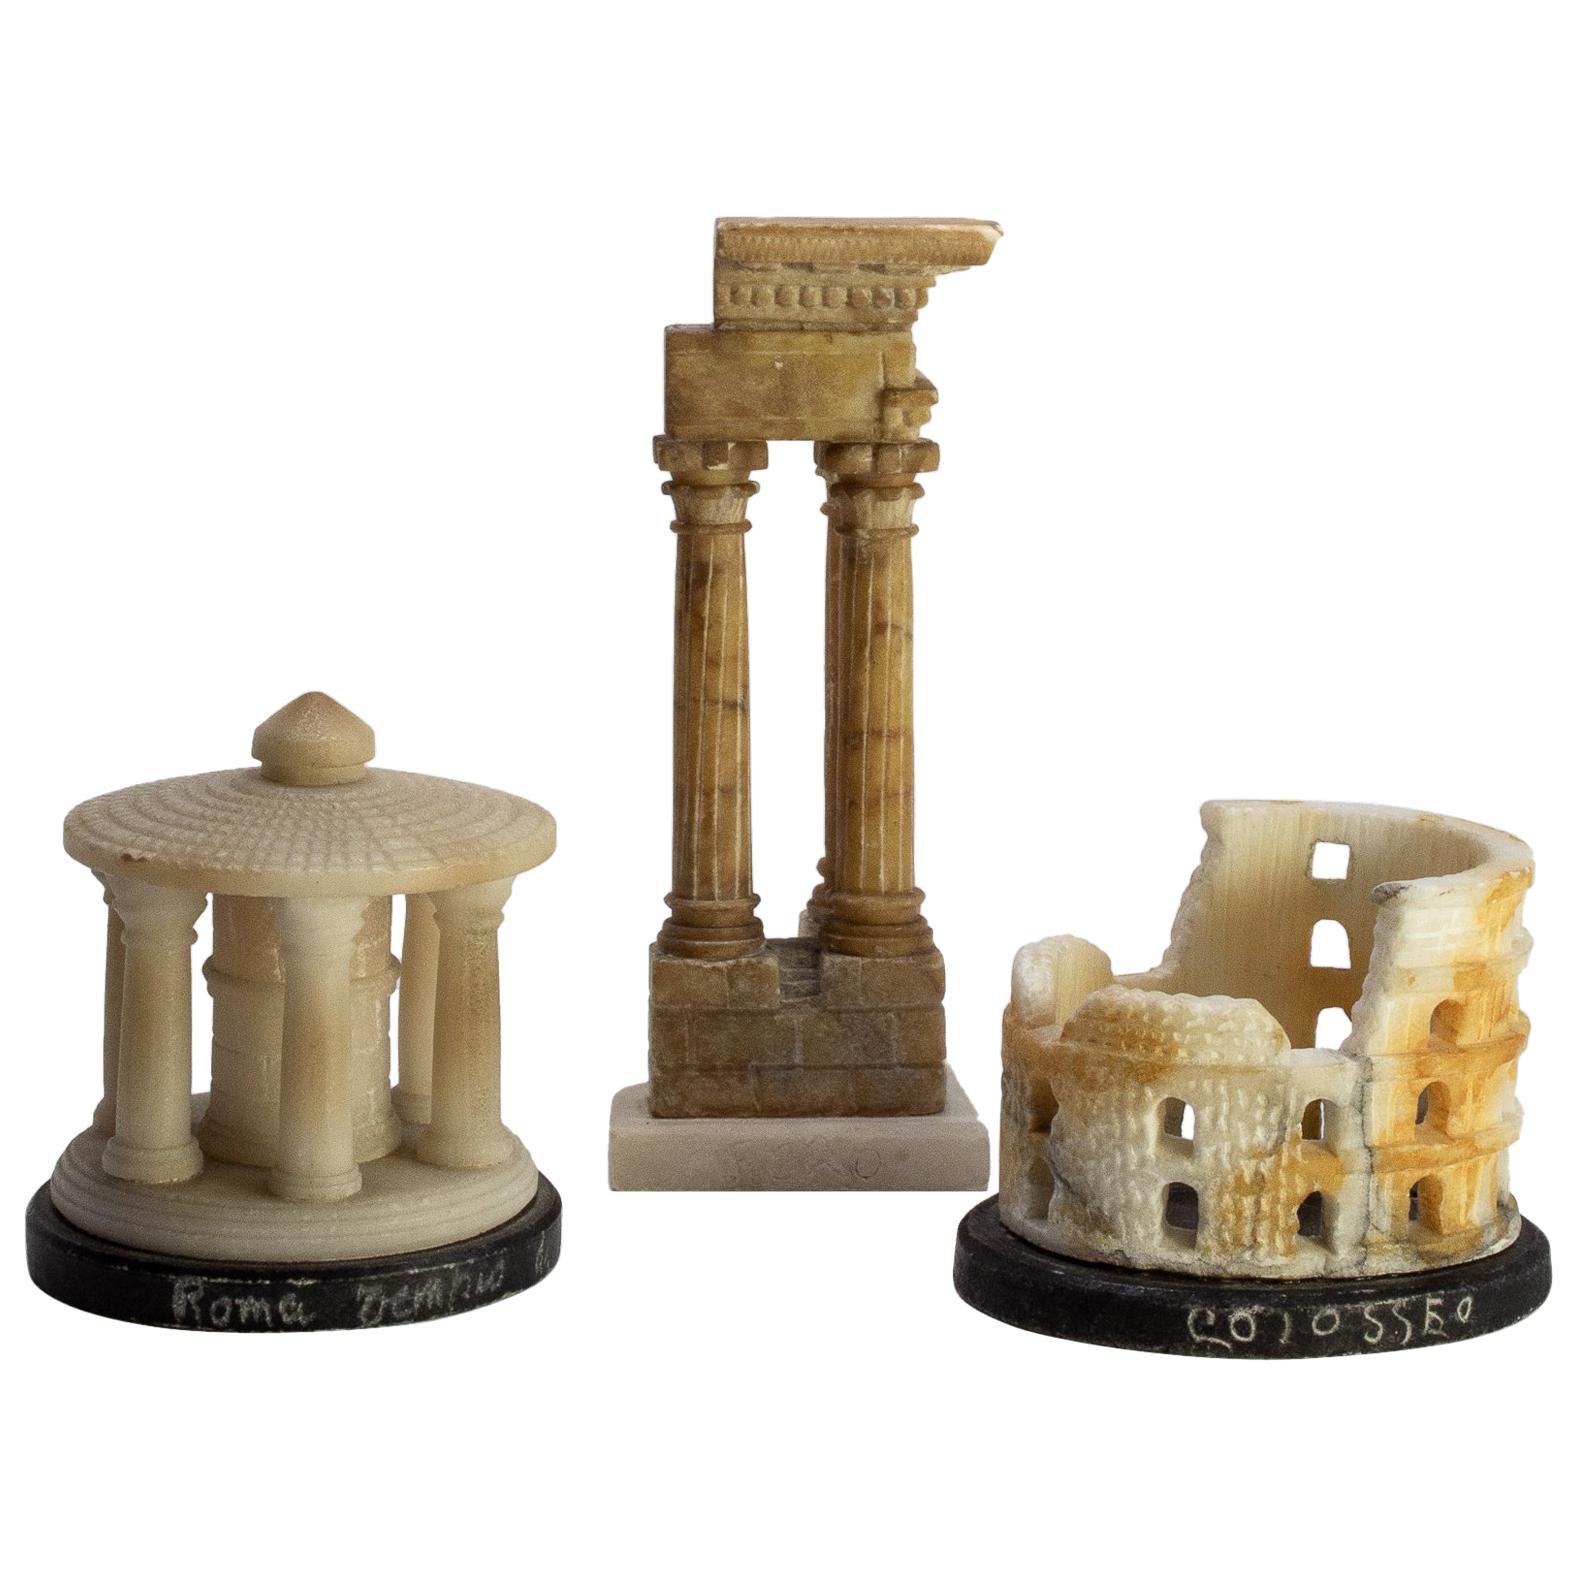 Group of three 19th century. Alabaster Grand Tour models, Rome. 

Start a Grand Tour model collection of the top three Roman architectural souvenirs - the Colosseum, the Temple of Vespasian, and the Temple of Vesta. All made of alabaster quarried